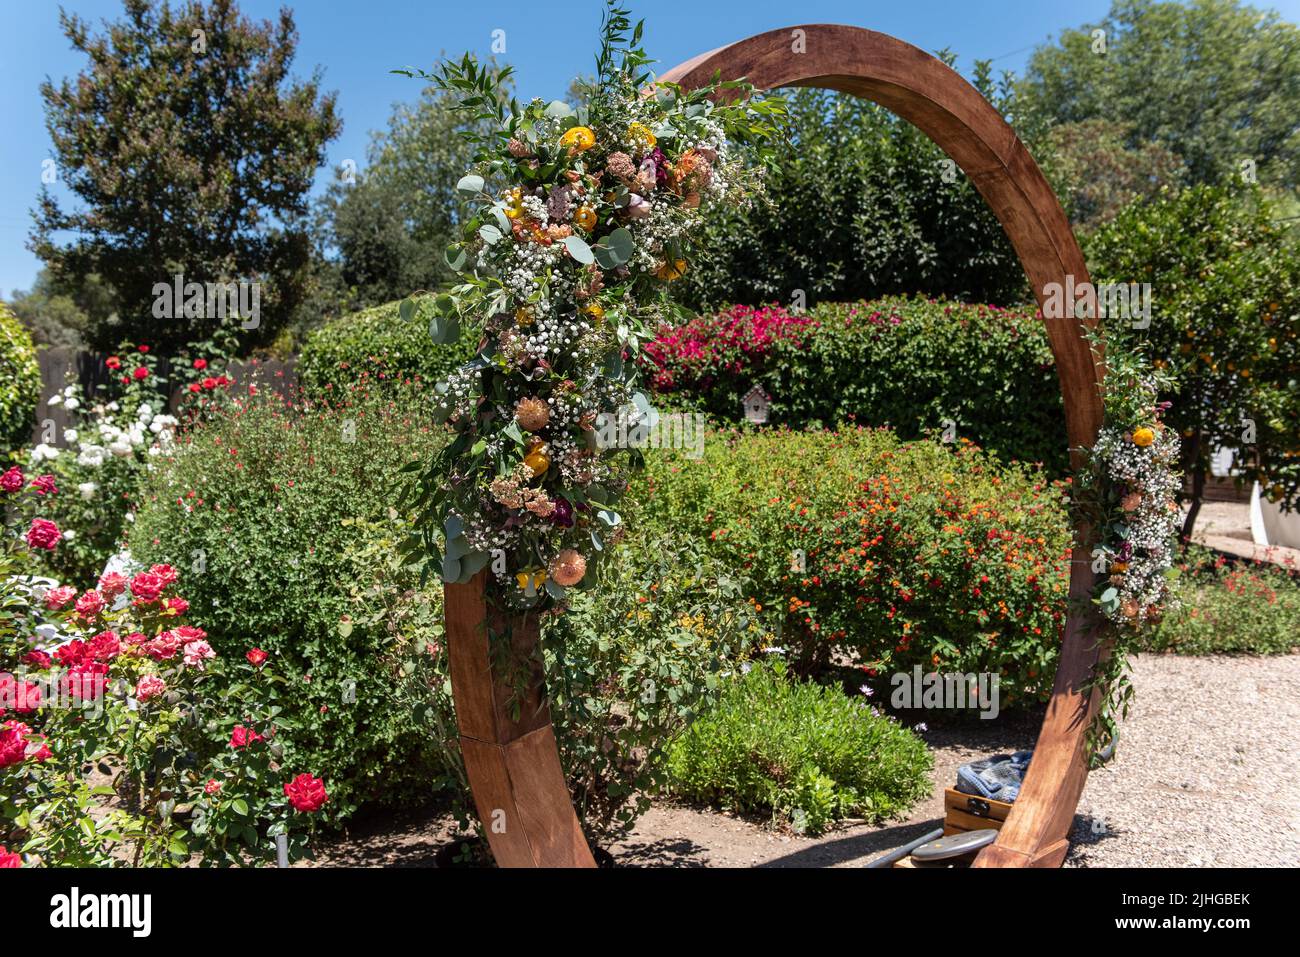 Wooden circle arch decorated with baby's breath flowers makes a perfect altar for the outdoor backyard wedding. Stock Photo